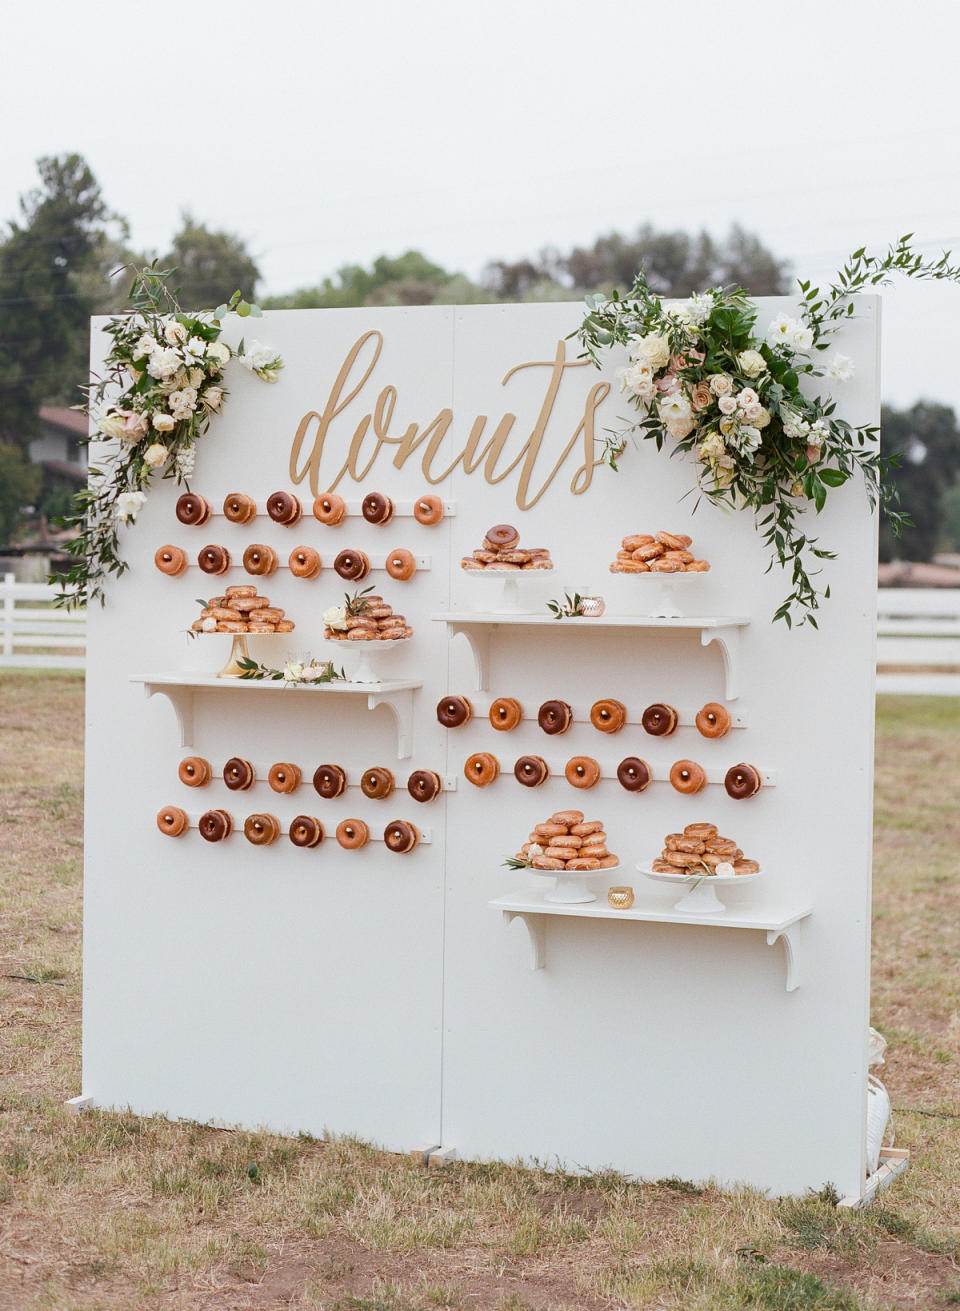 23 Delicious Ways to Serve Donuts at Your Wedding